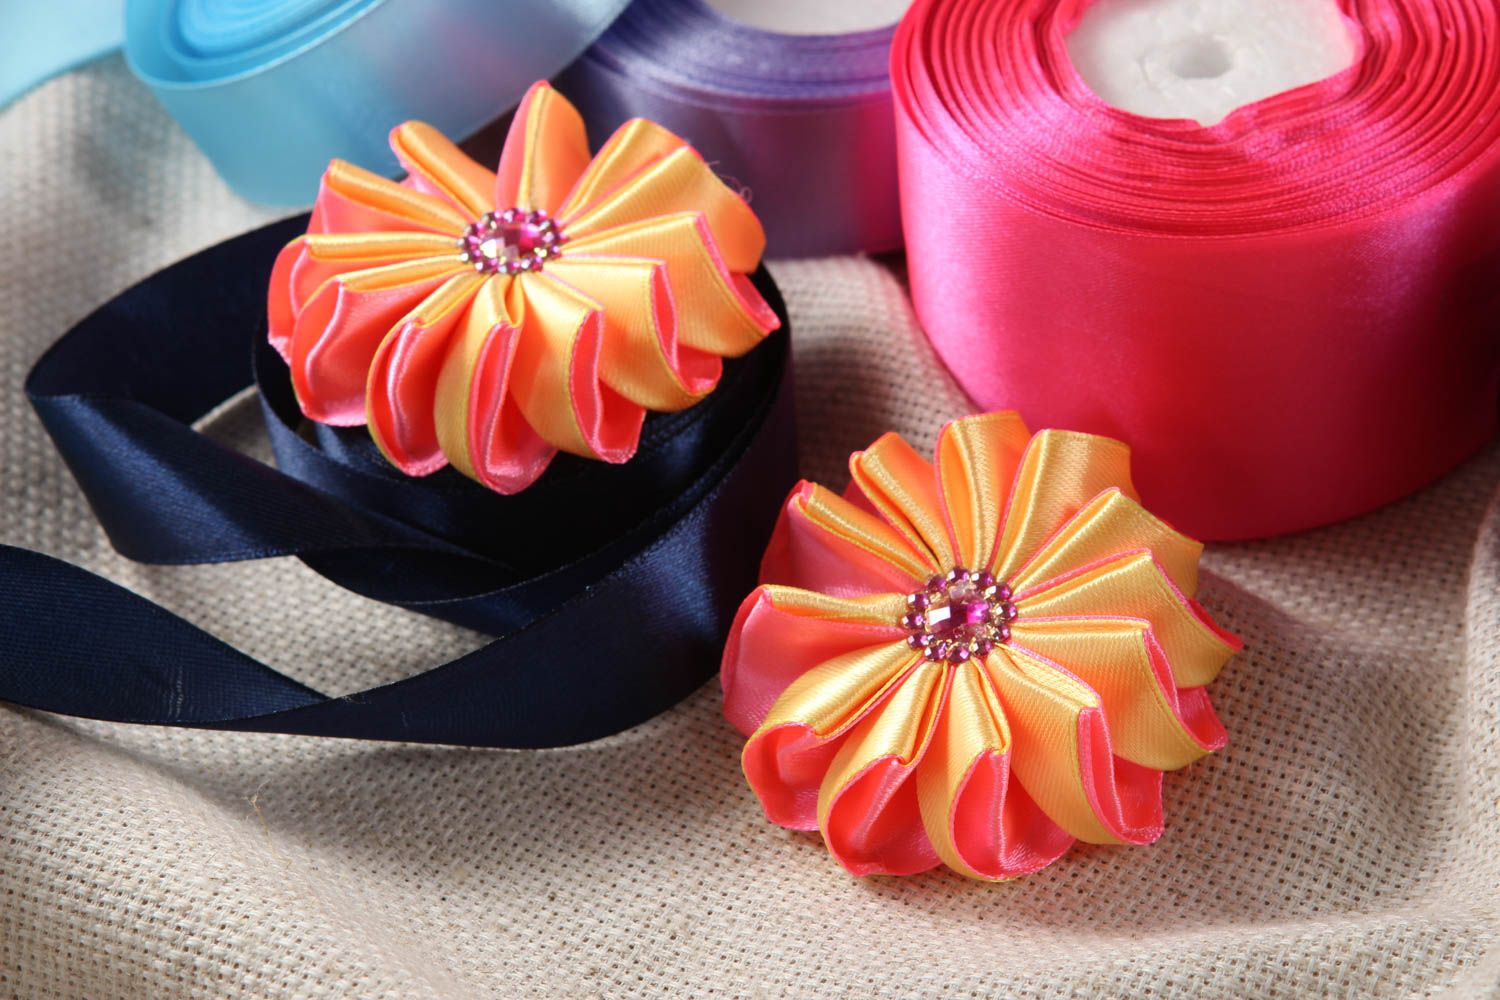 Kanzashi technique flowers of satin ribbons unusual flowers fittings for jewelry photo 1